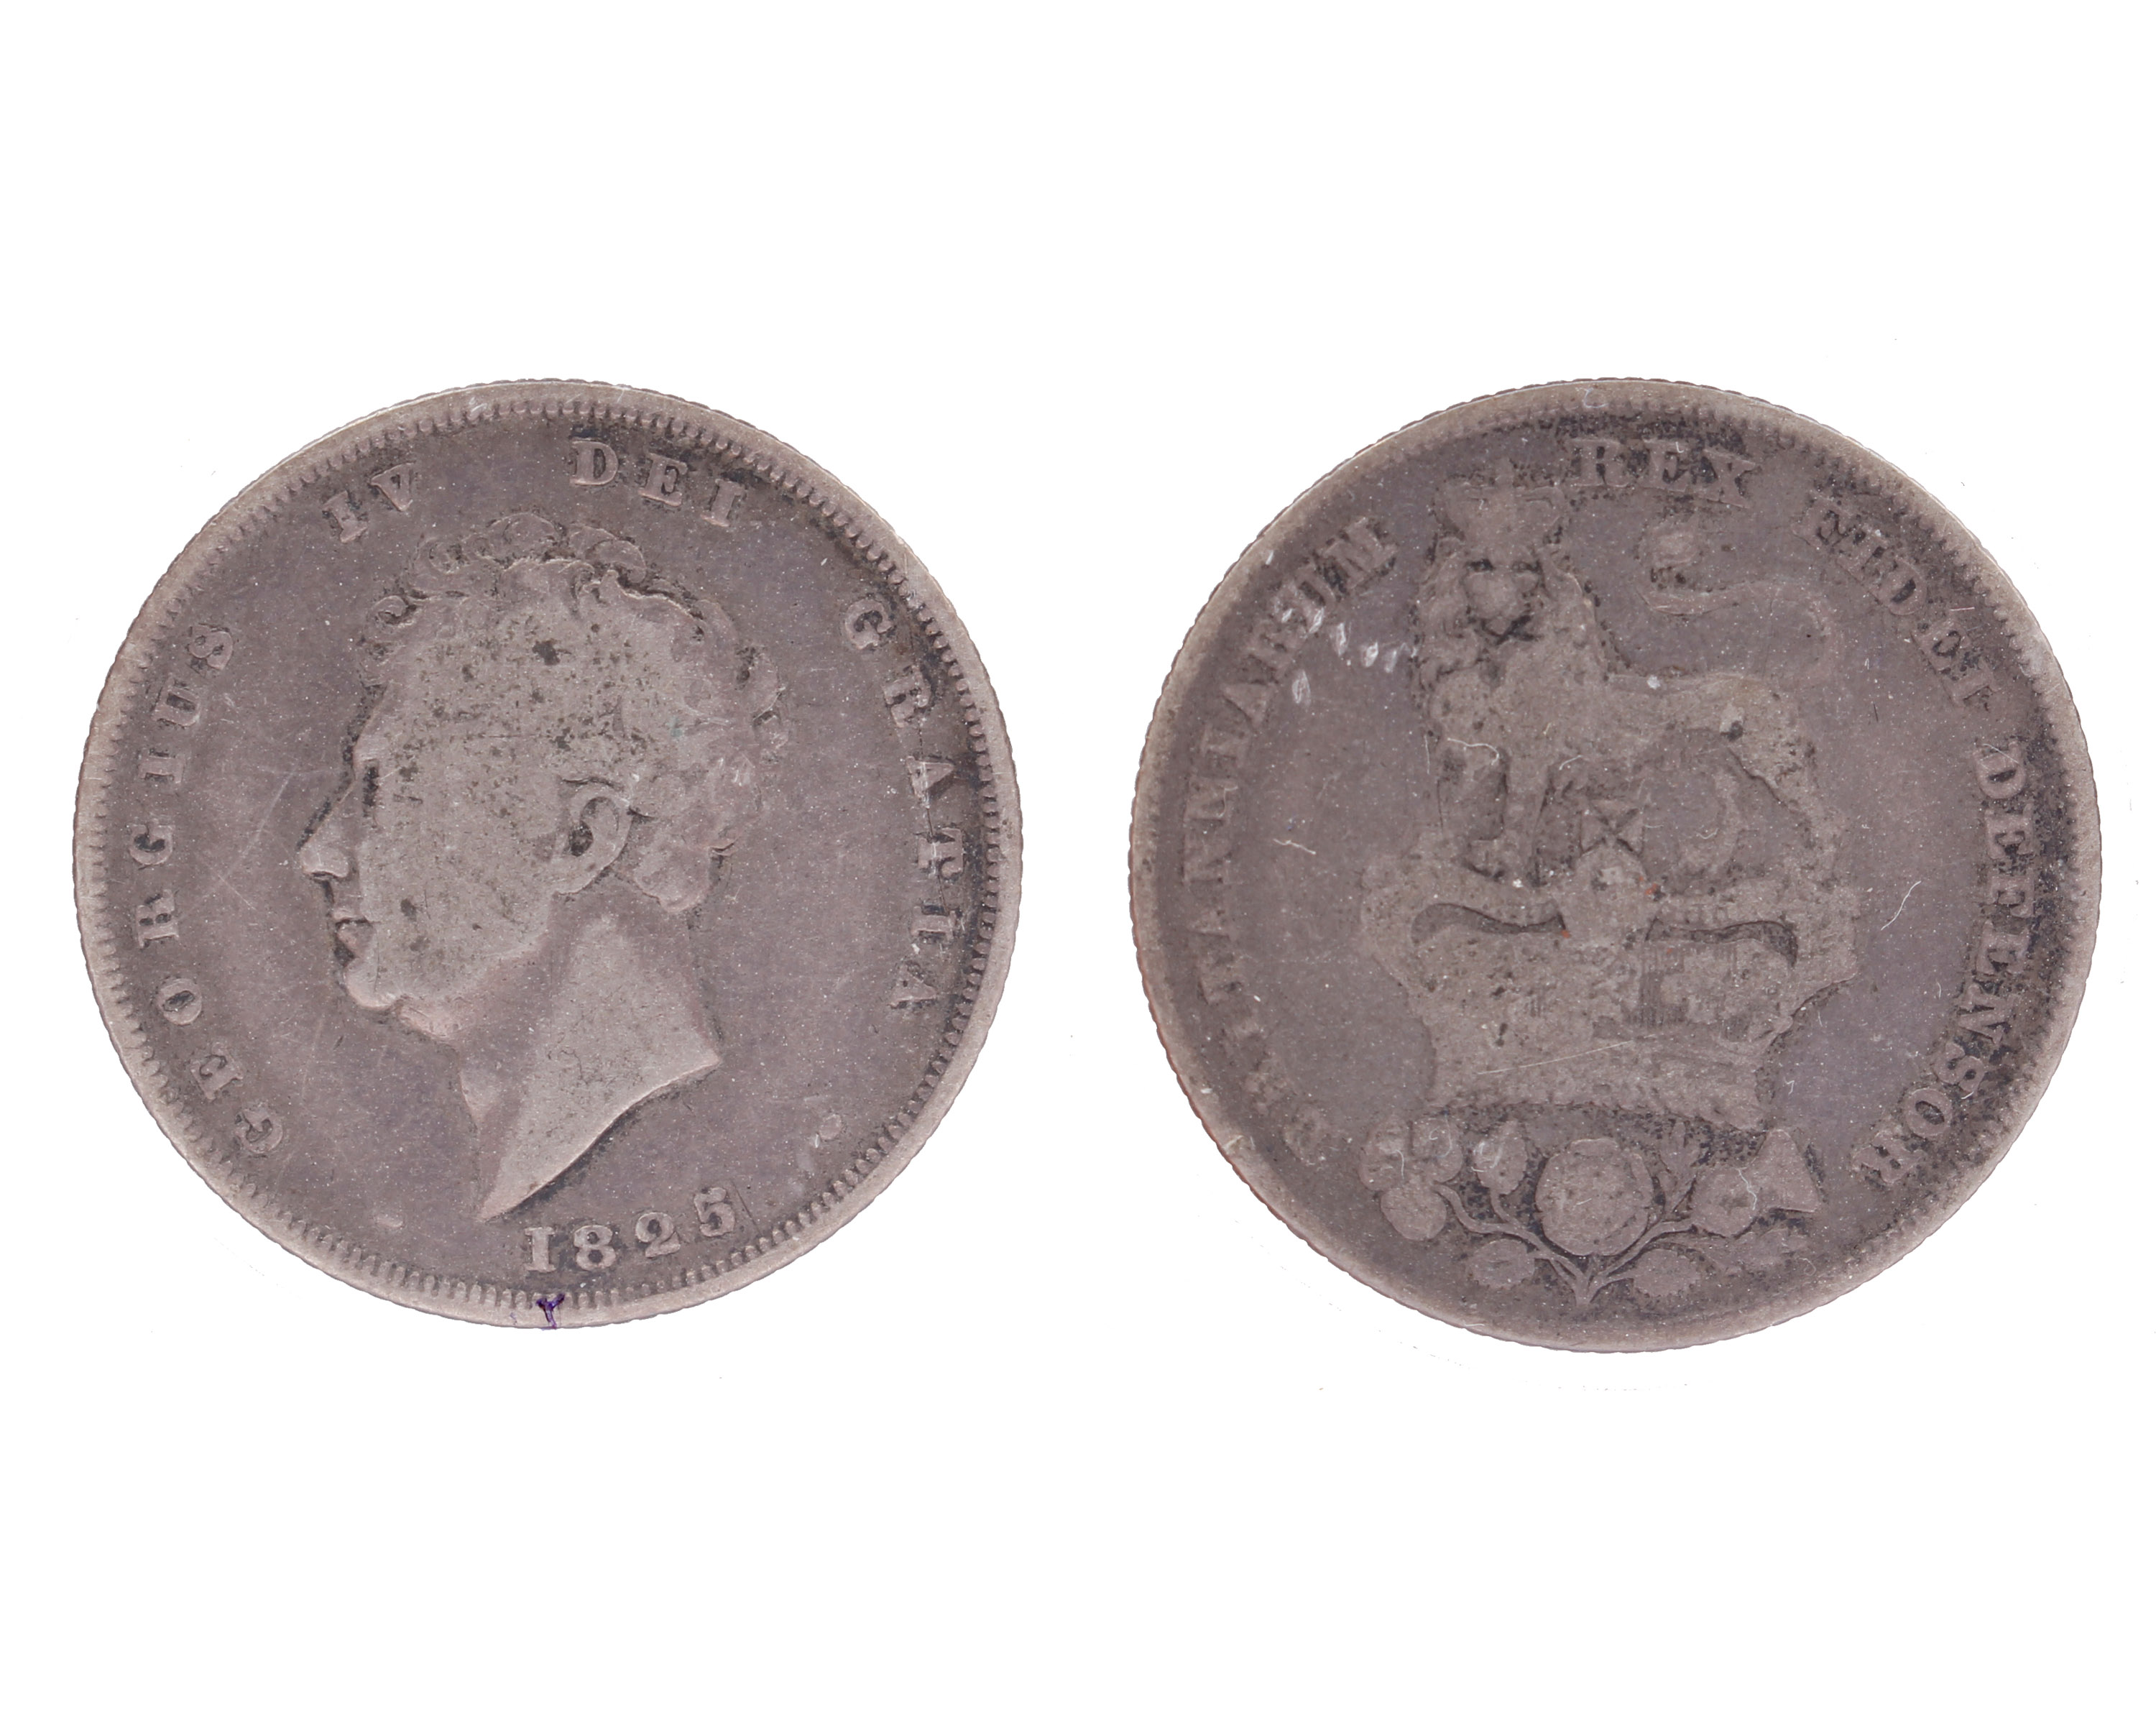 A rare 1825 shilling George IV SILVER Shilling coin -type 3 has a capital i as the first numeral